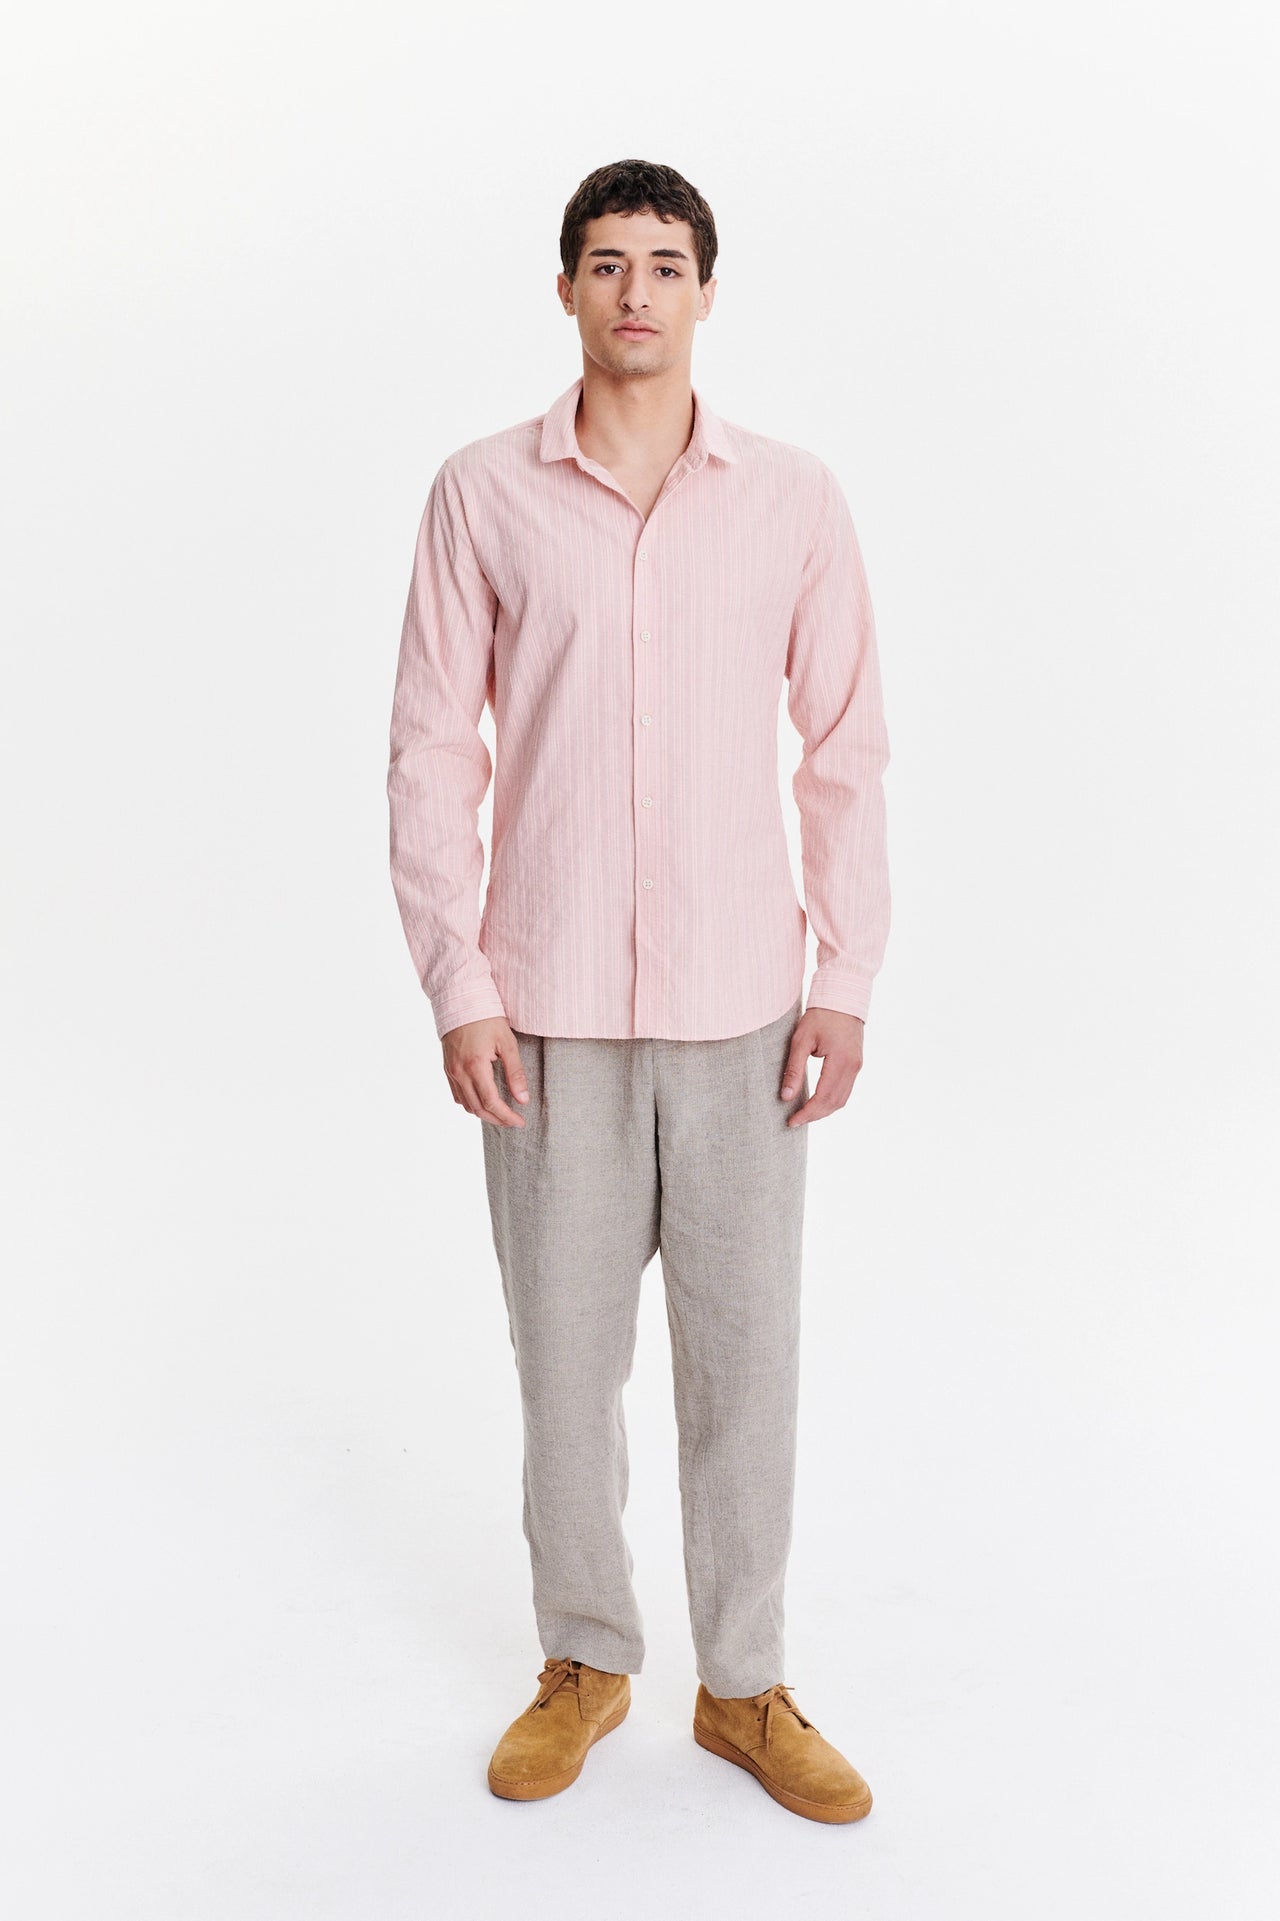 New Cute Shirt in a Subtle Pink Striped Structural Italian Cotton